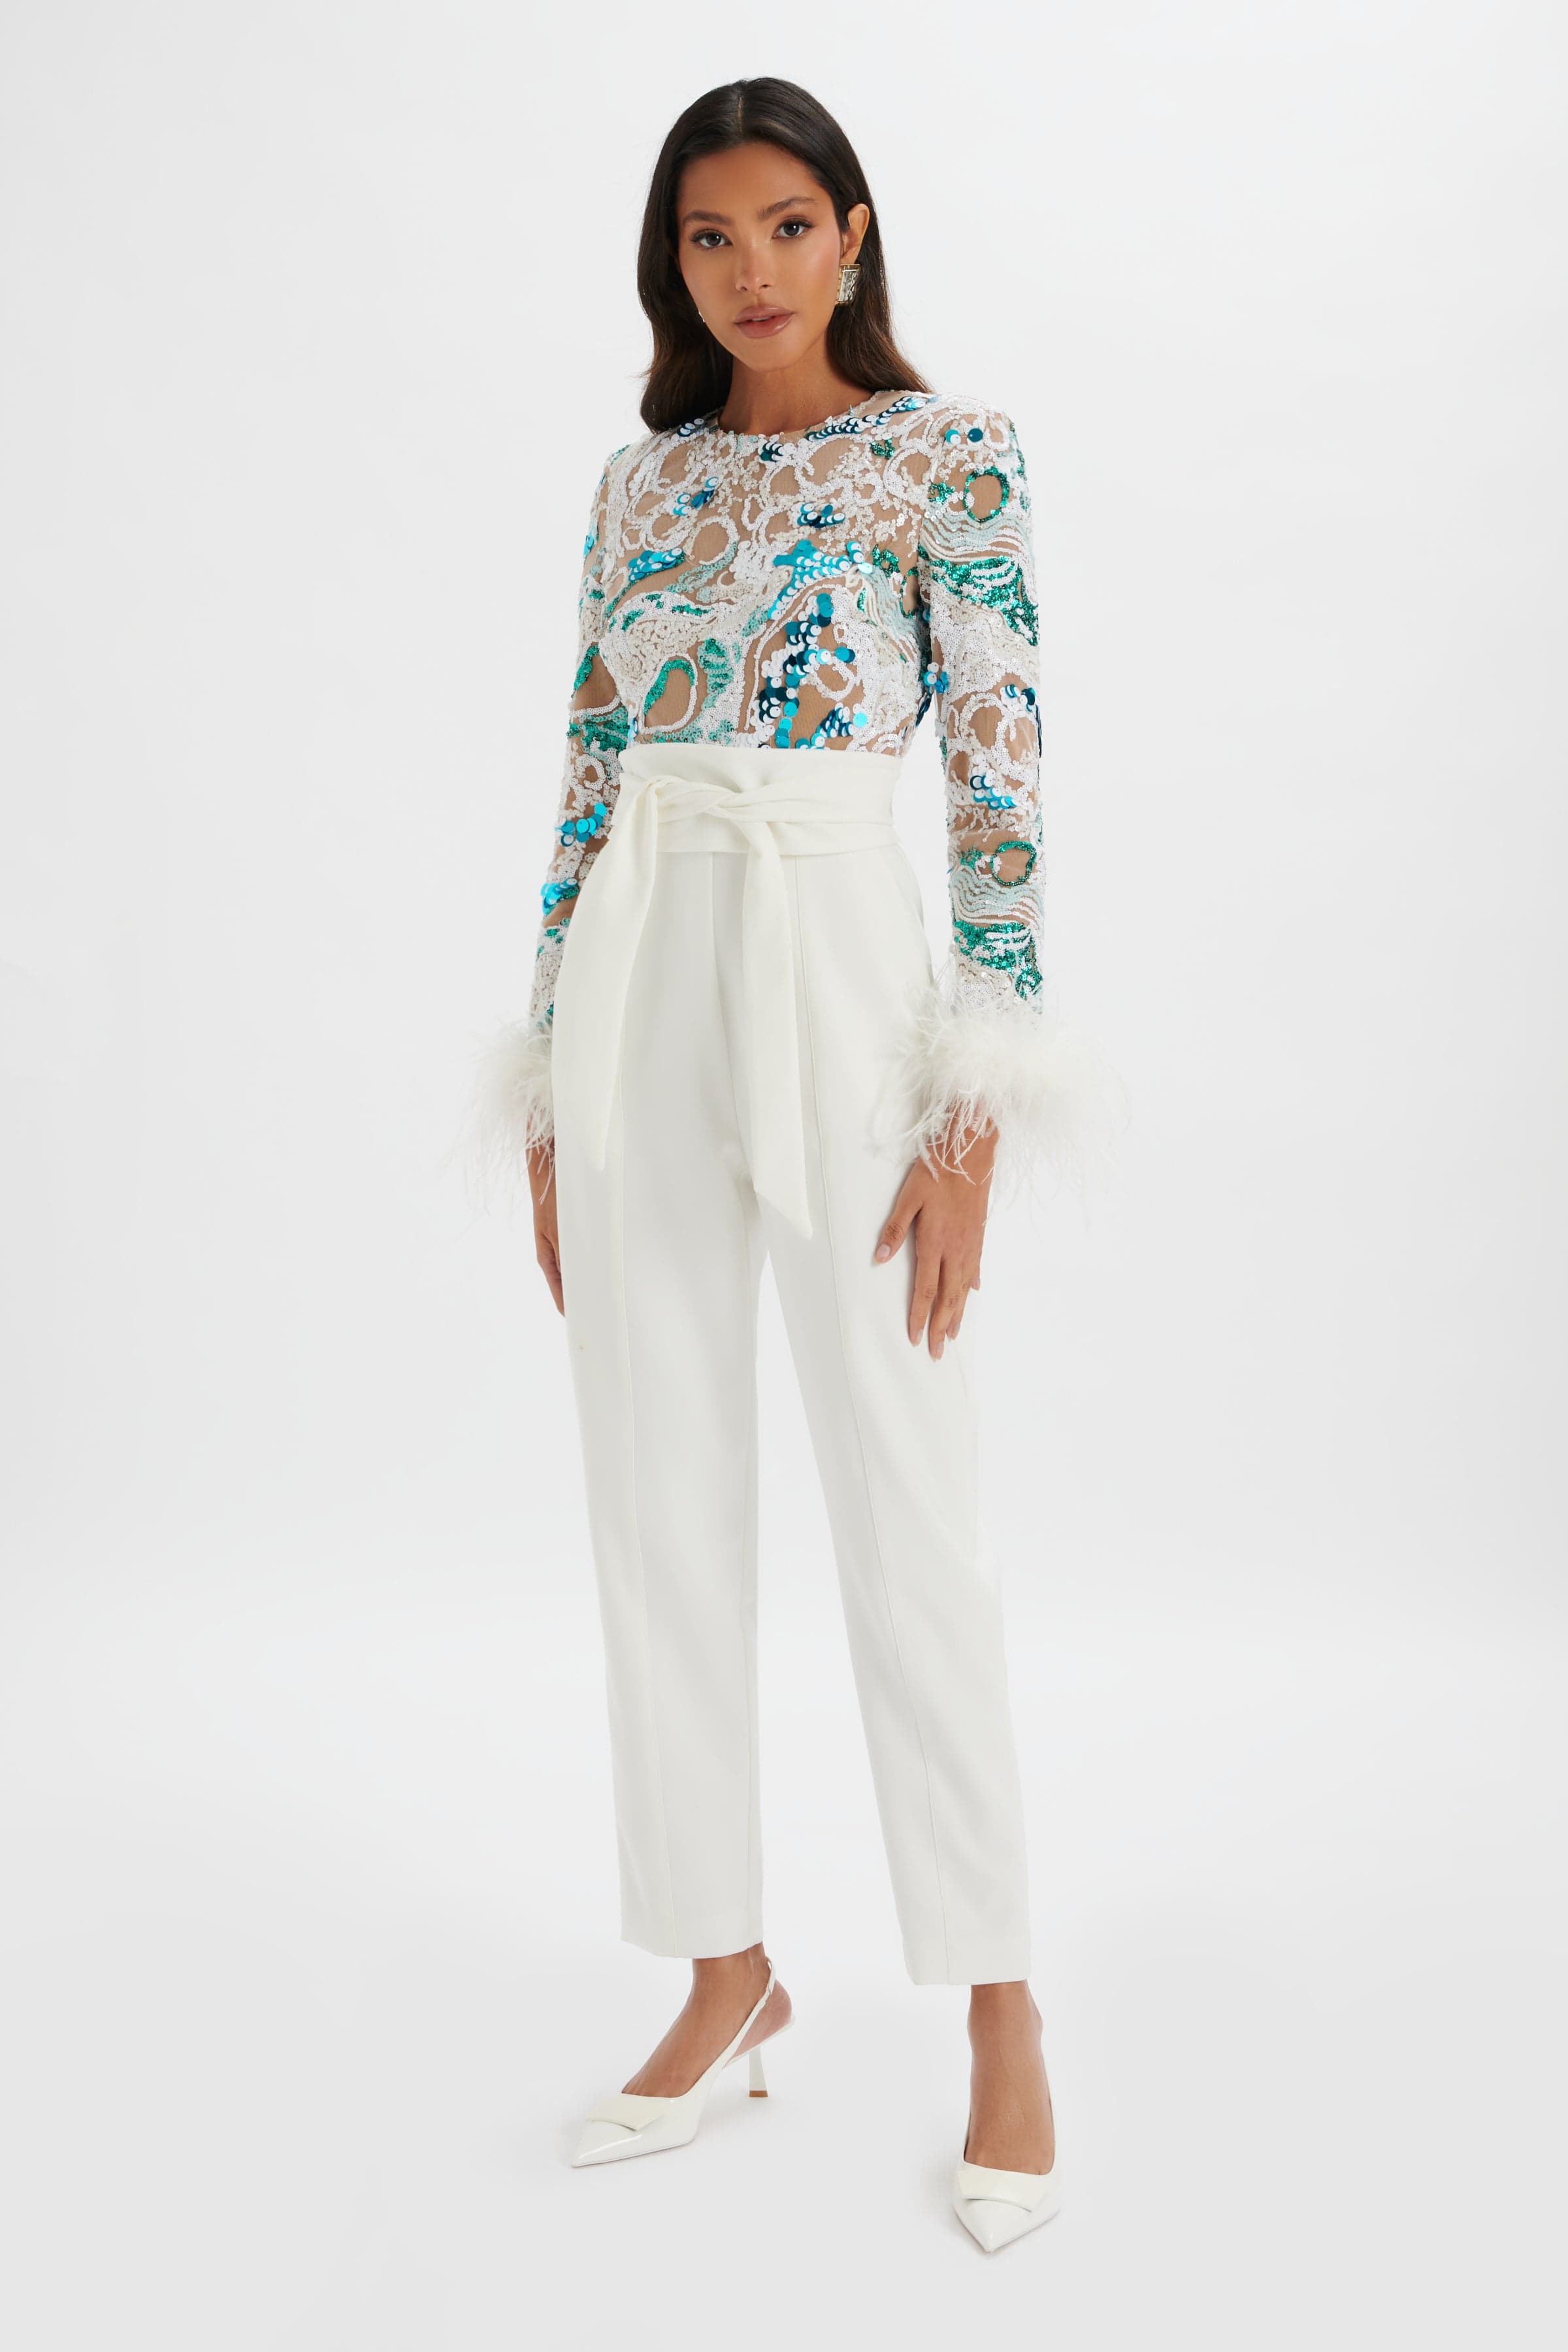 DELIA Embellished Feather Cuff Jumpsuit in White